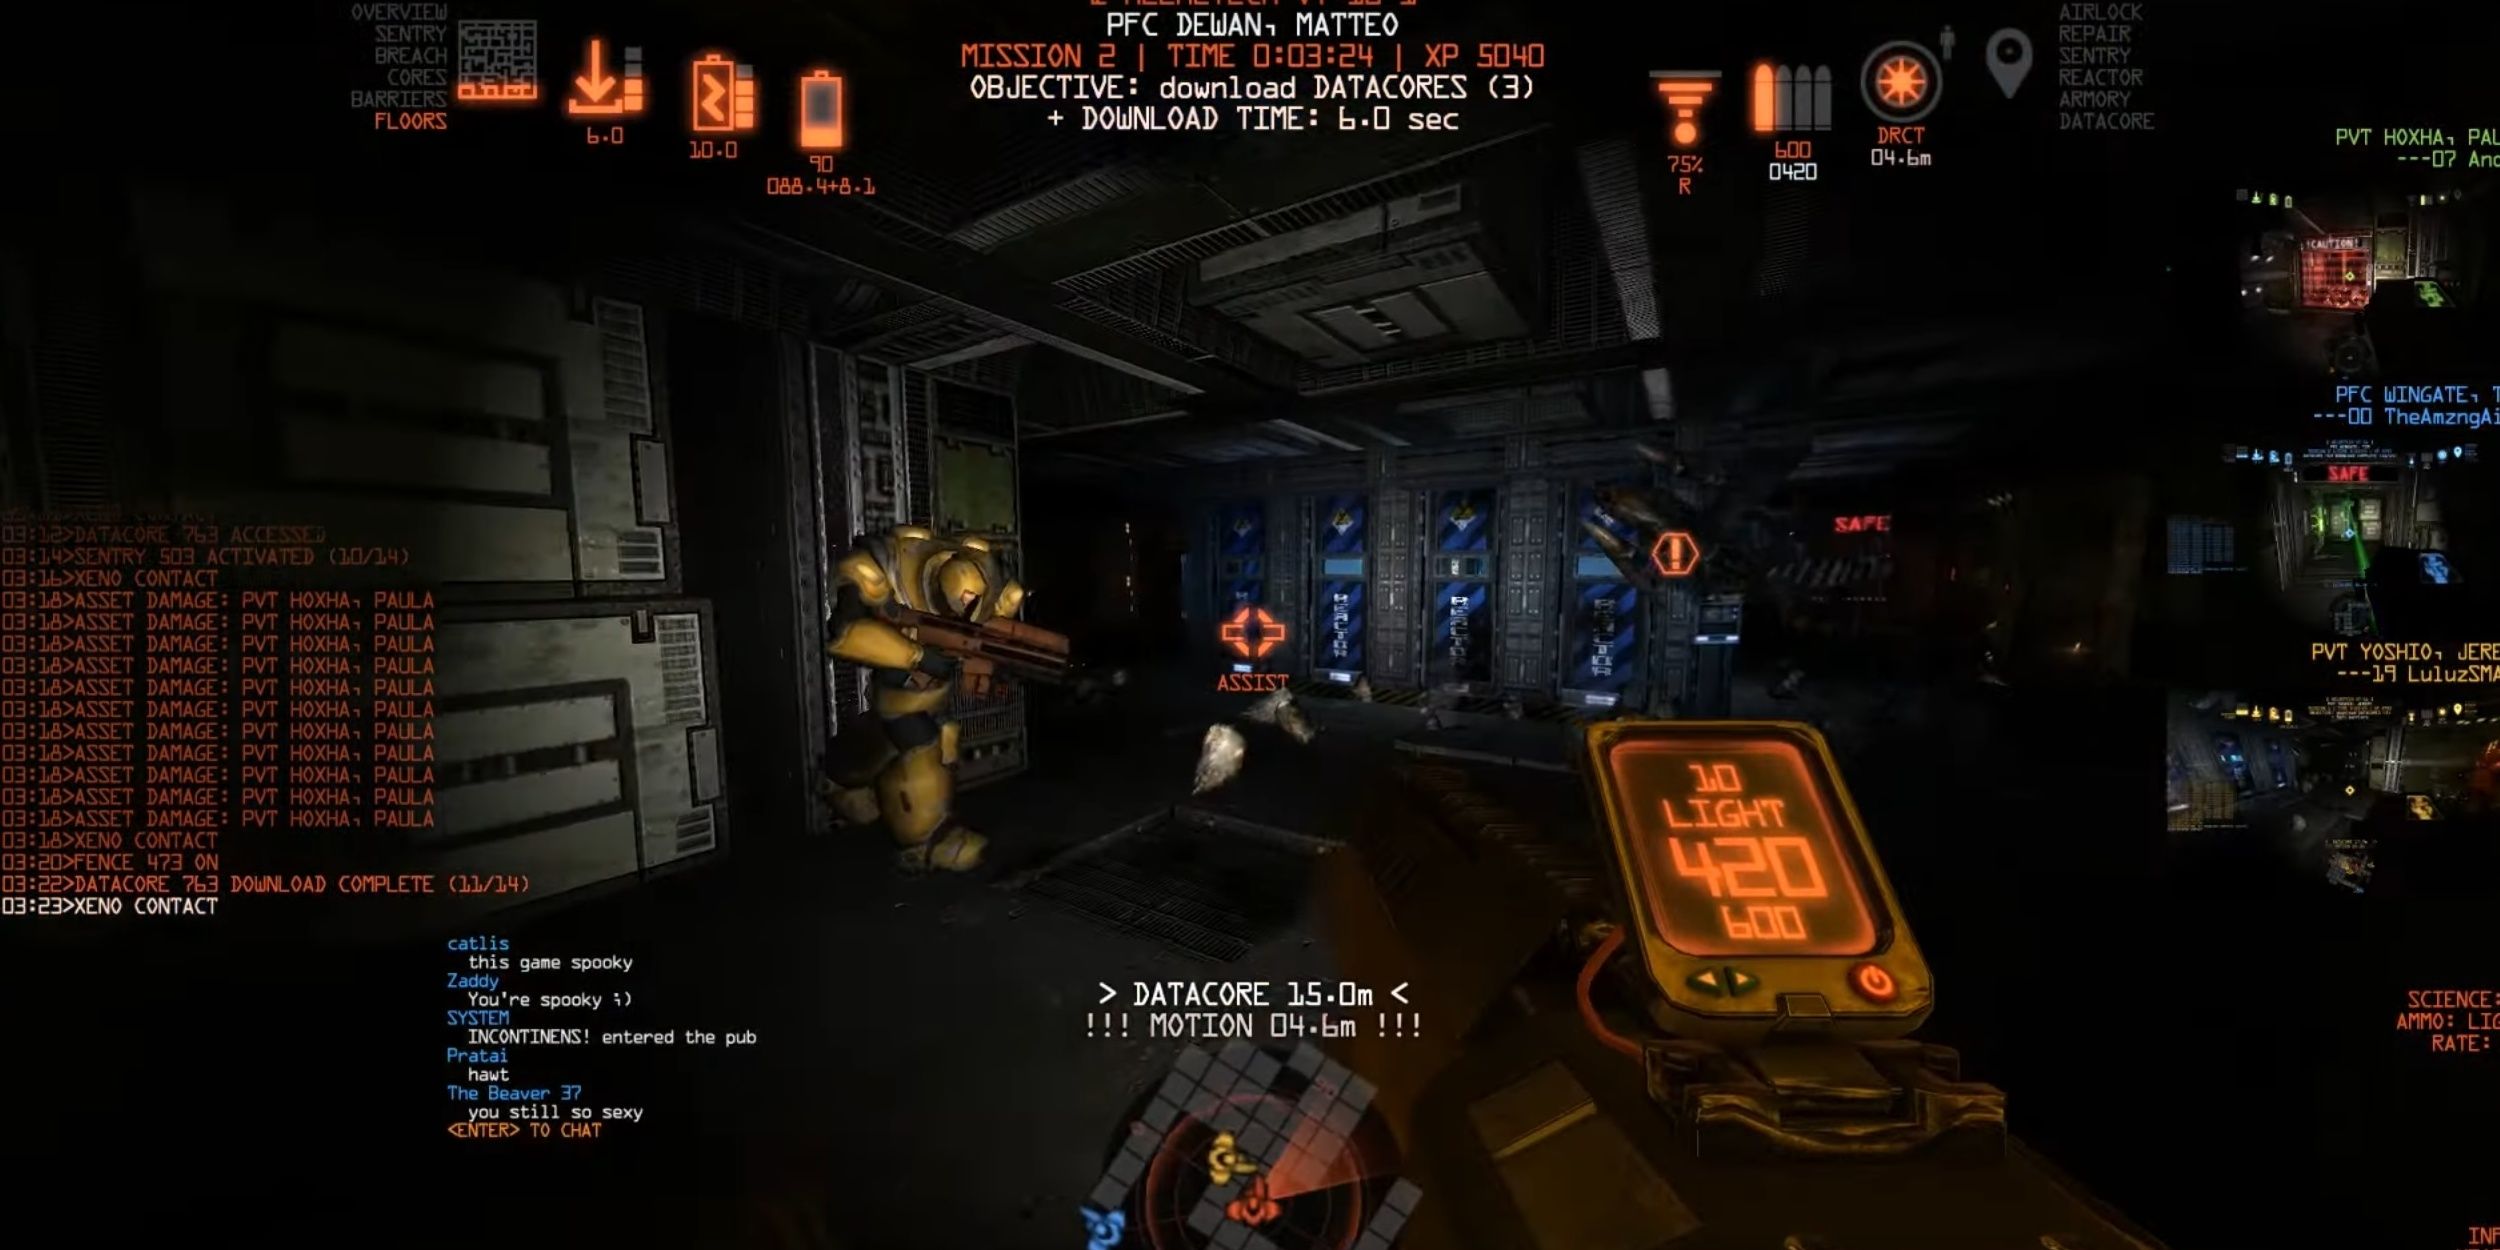 A player watching his teammate's back, about to open fire on an approaching Space Beast